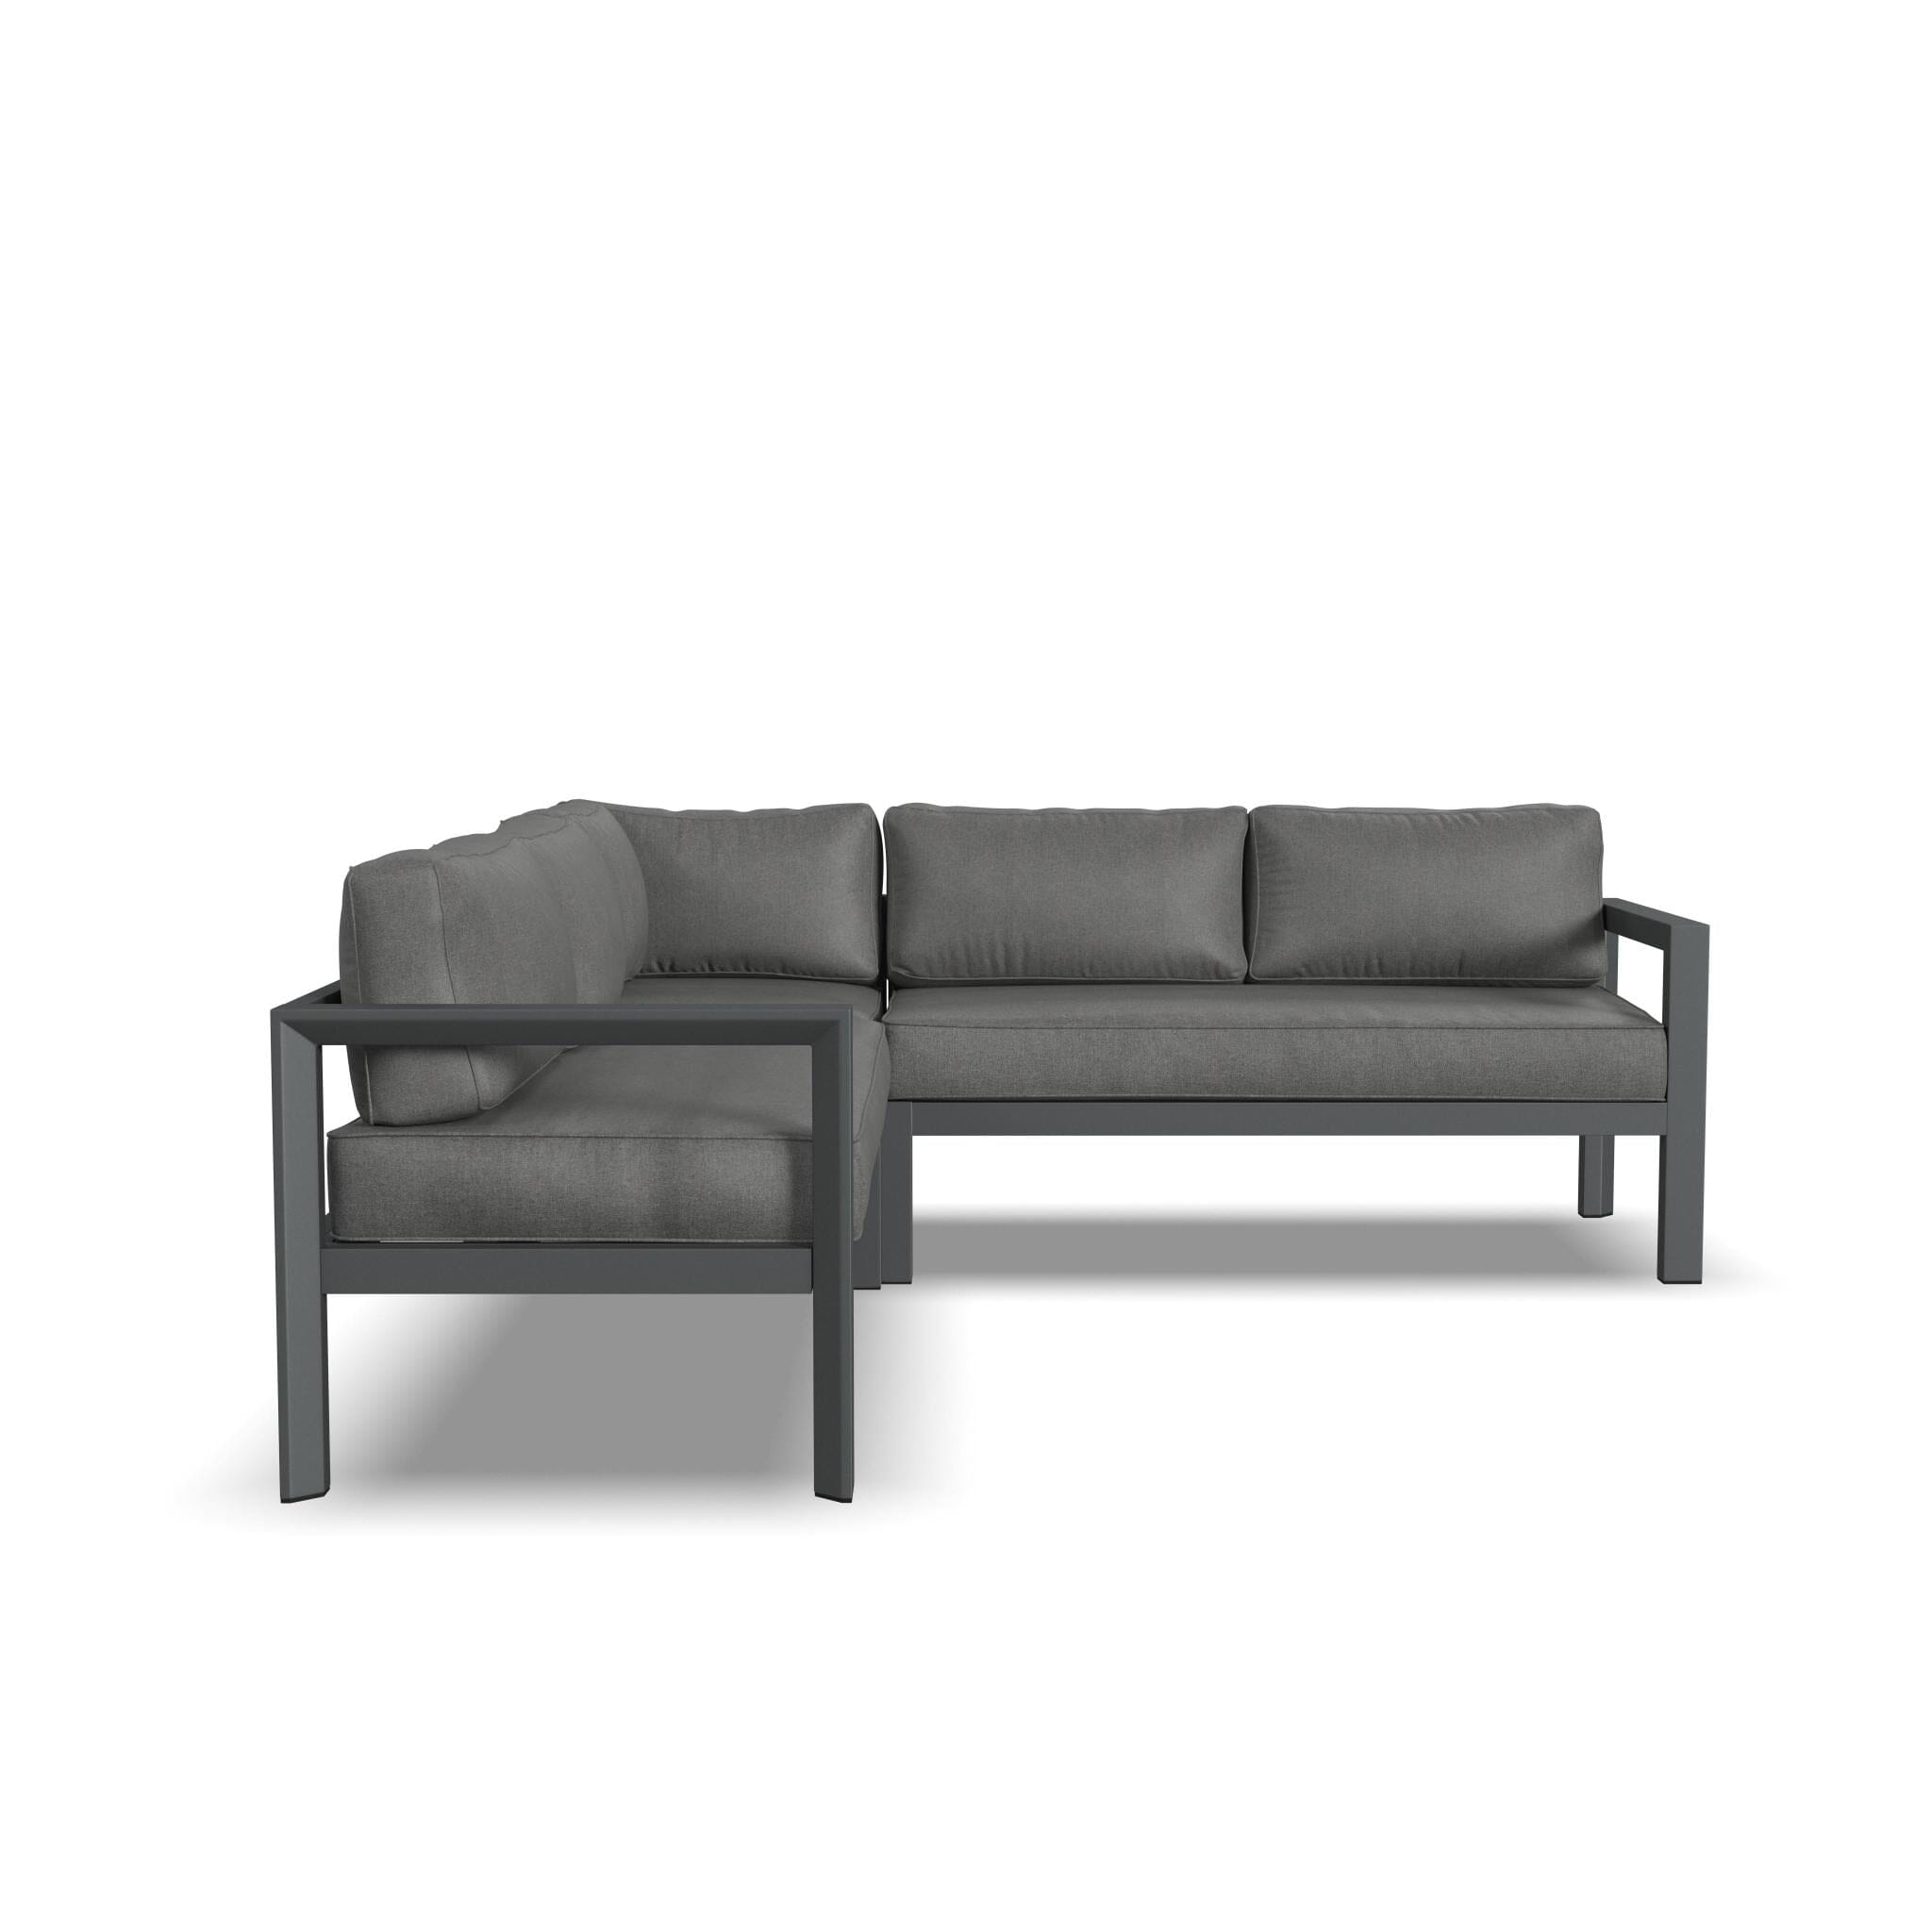 Modern & Contemporary 5 Seat Sectional By Grayton Outdoor Seating Grayton